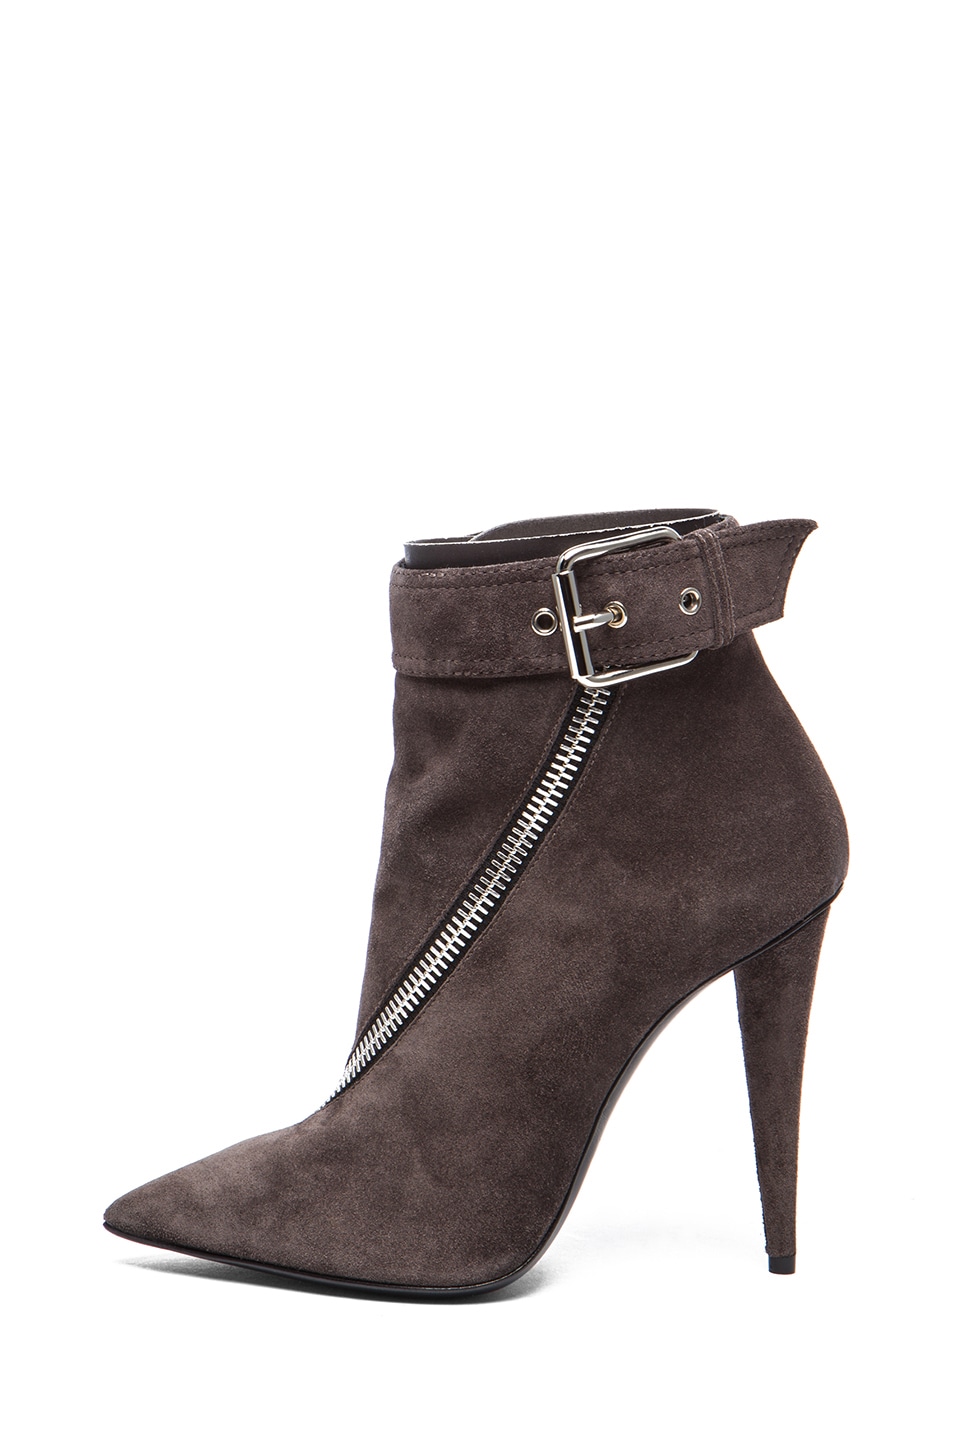 Image 1 of Giuseppe Zanotti Suede Booties in Flan